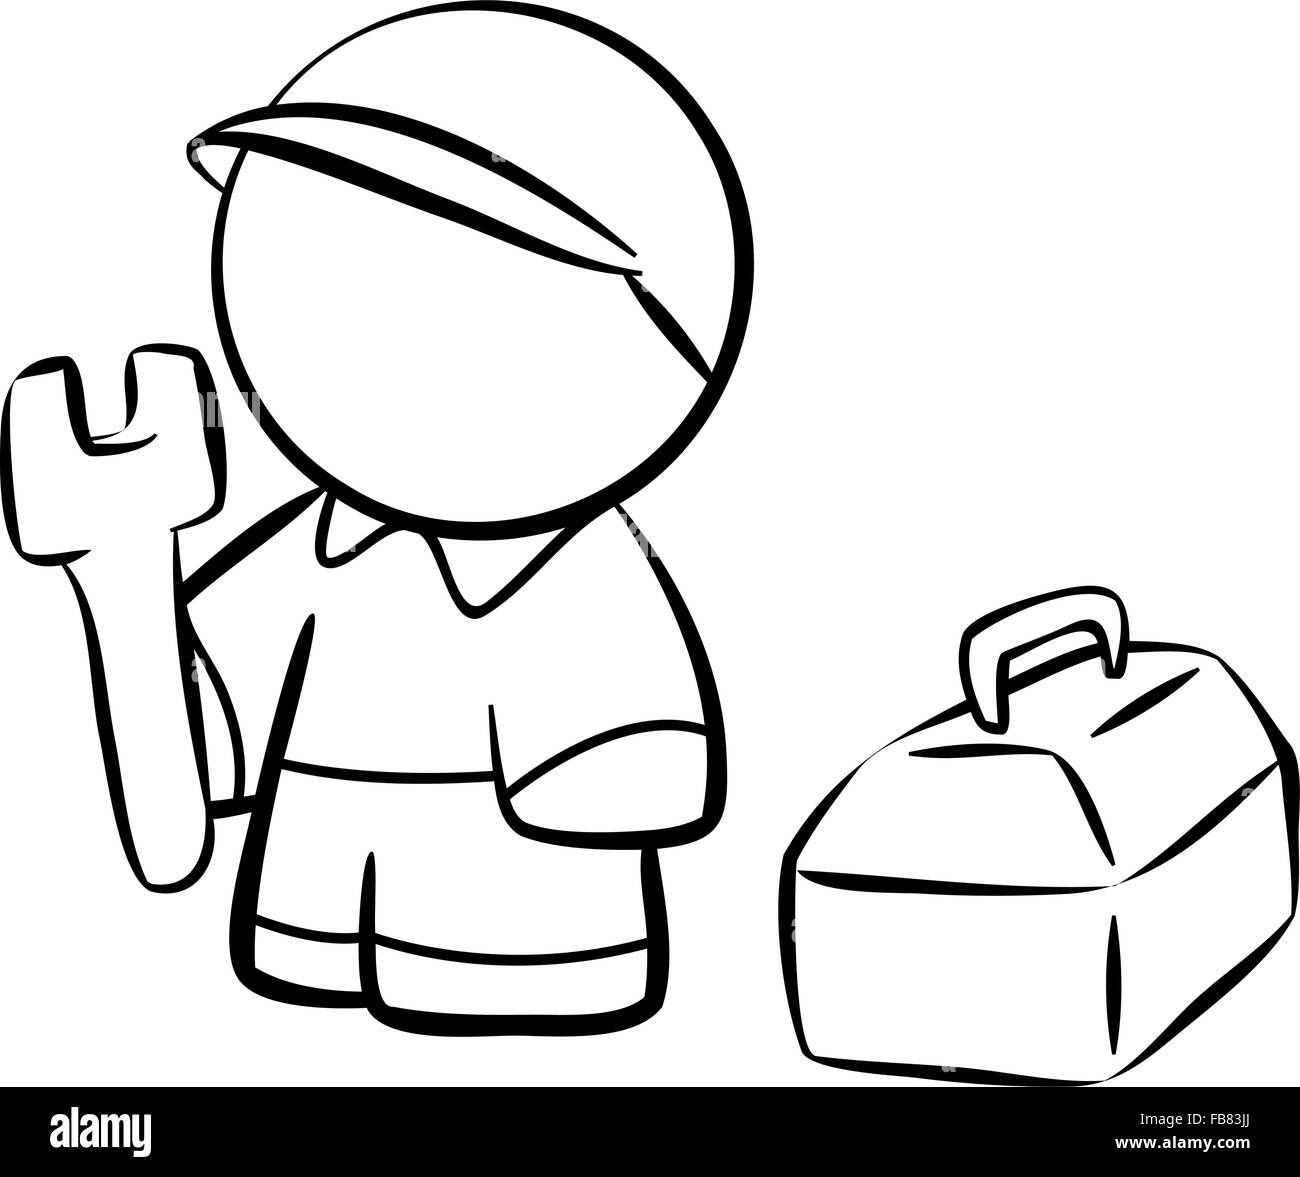 Line drawing of a contractor wit a wrench. Stock Vector